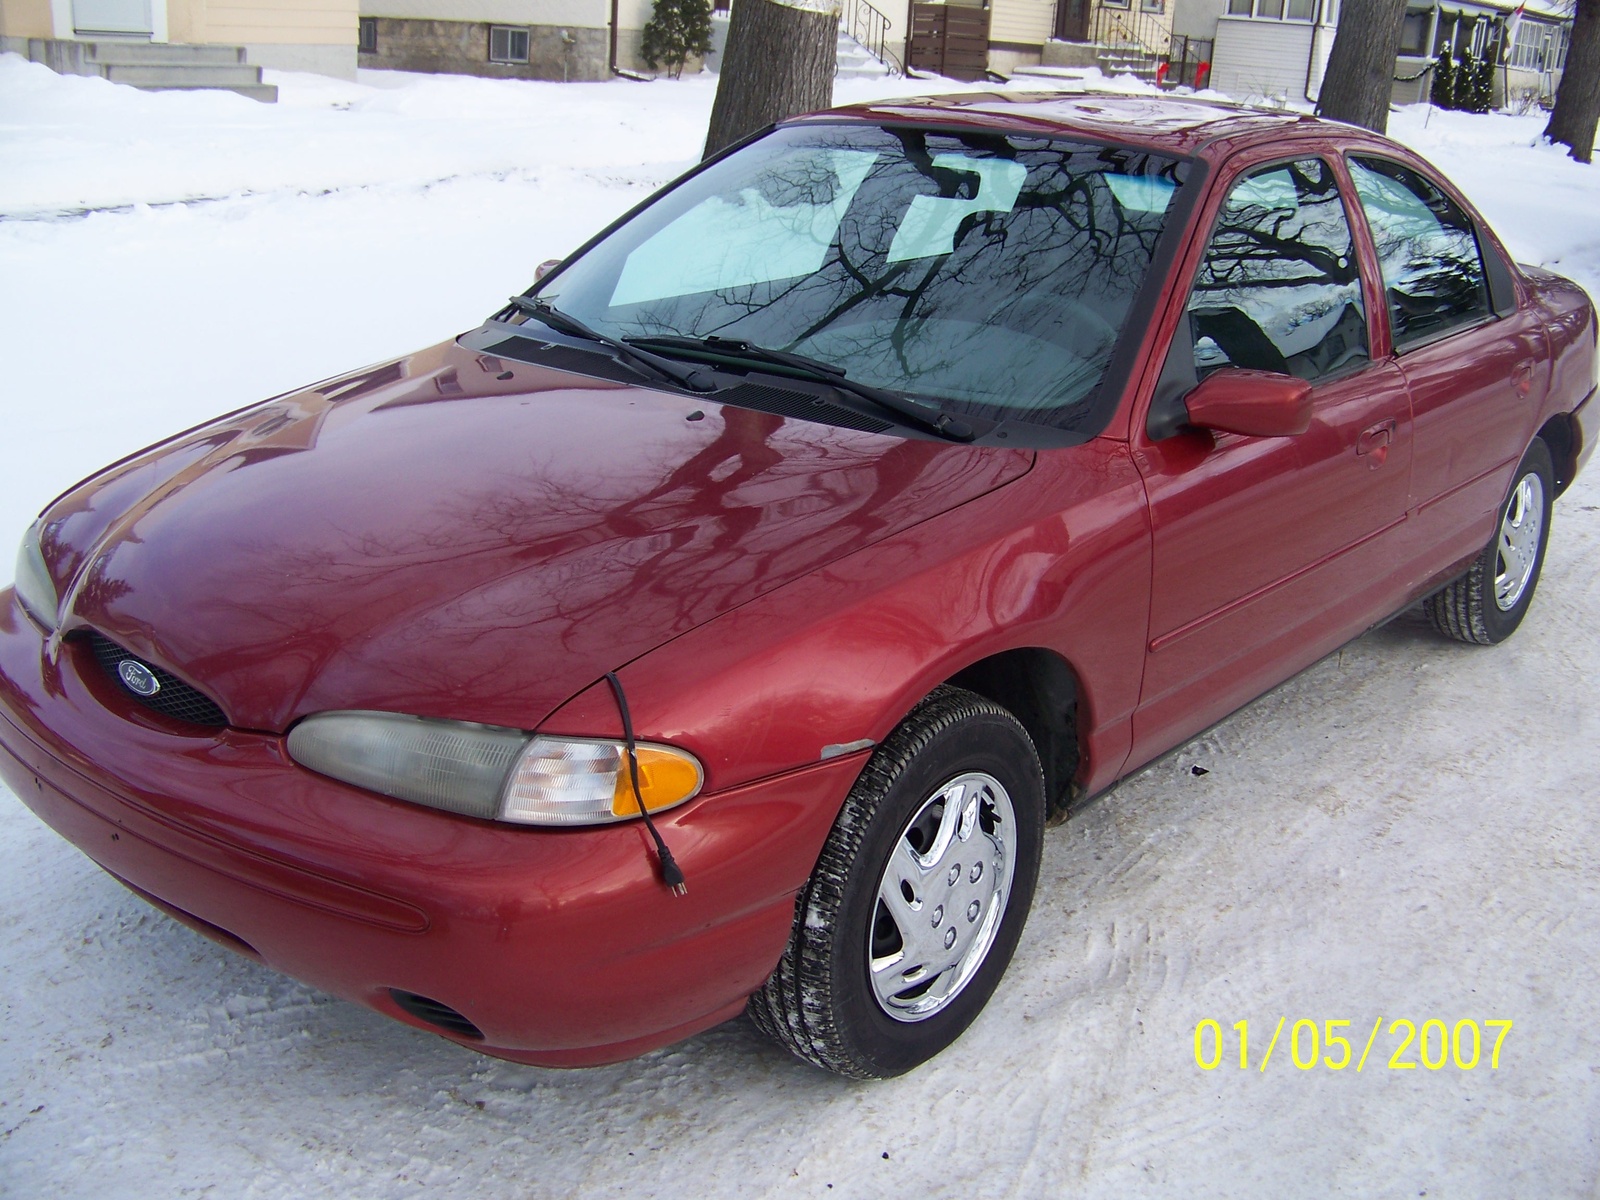 Specifications on 1996 ford contour #3